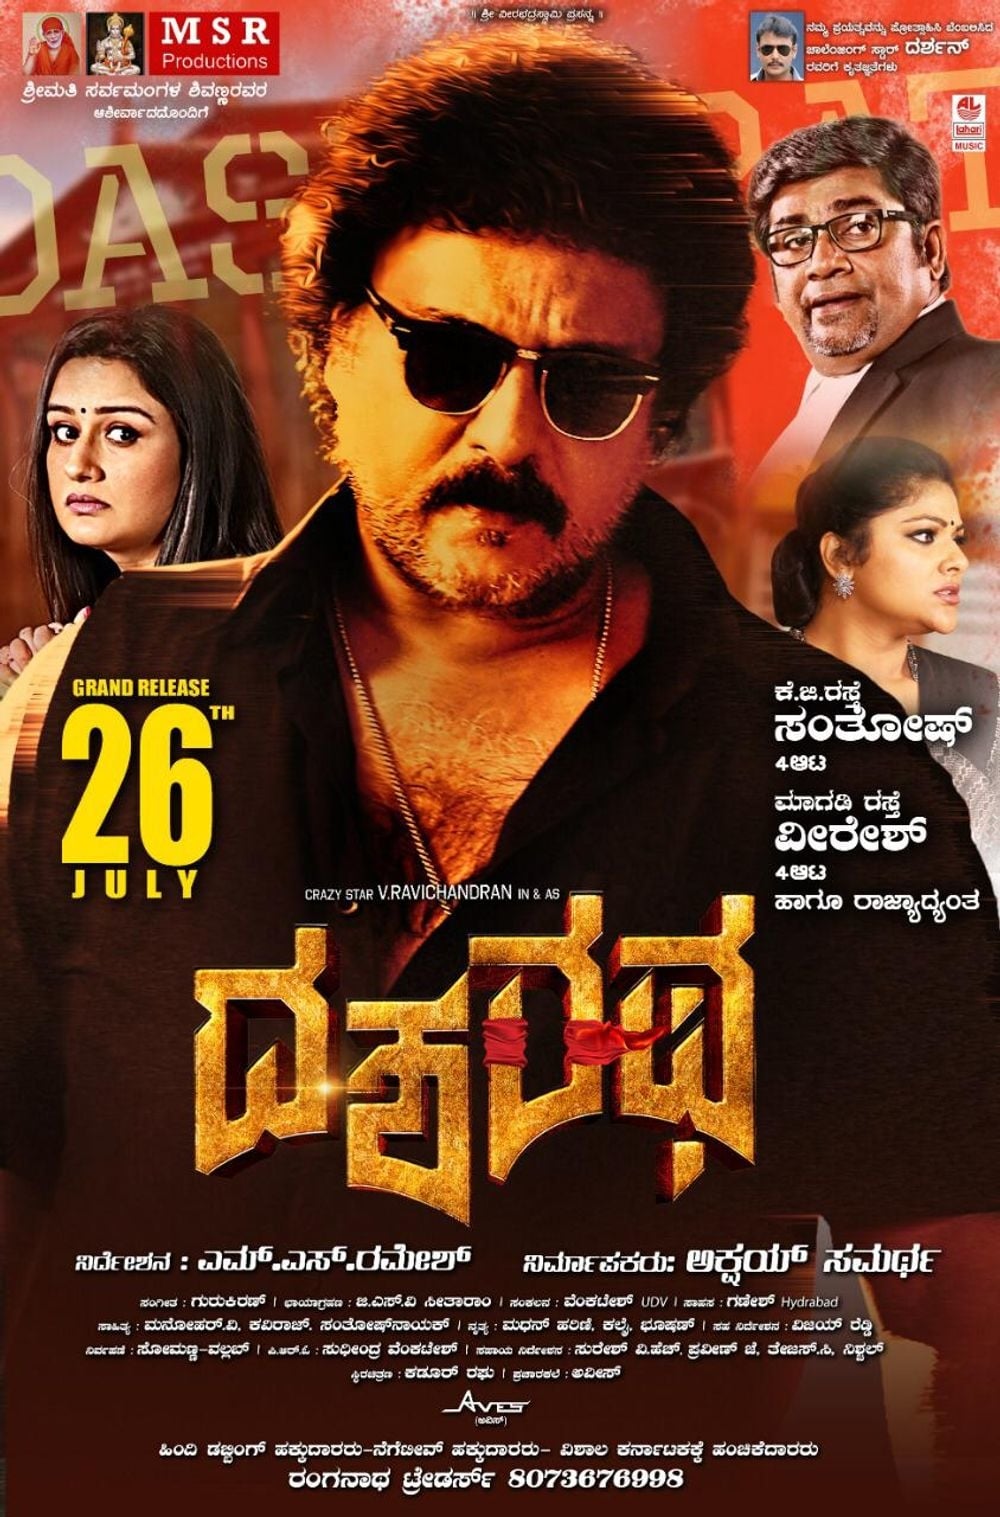 Poster for the movie "Dasharatha"